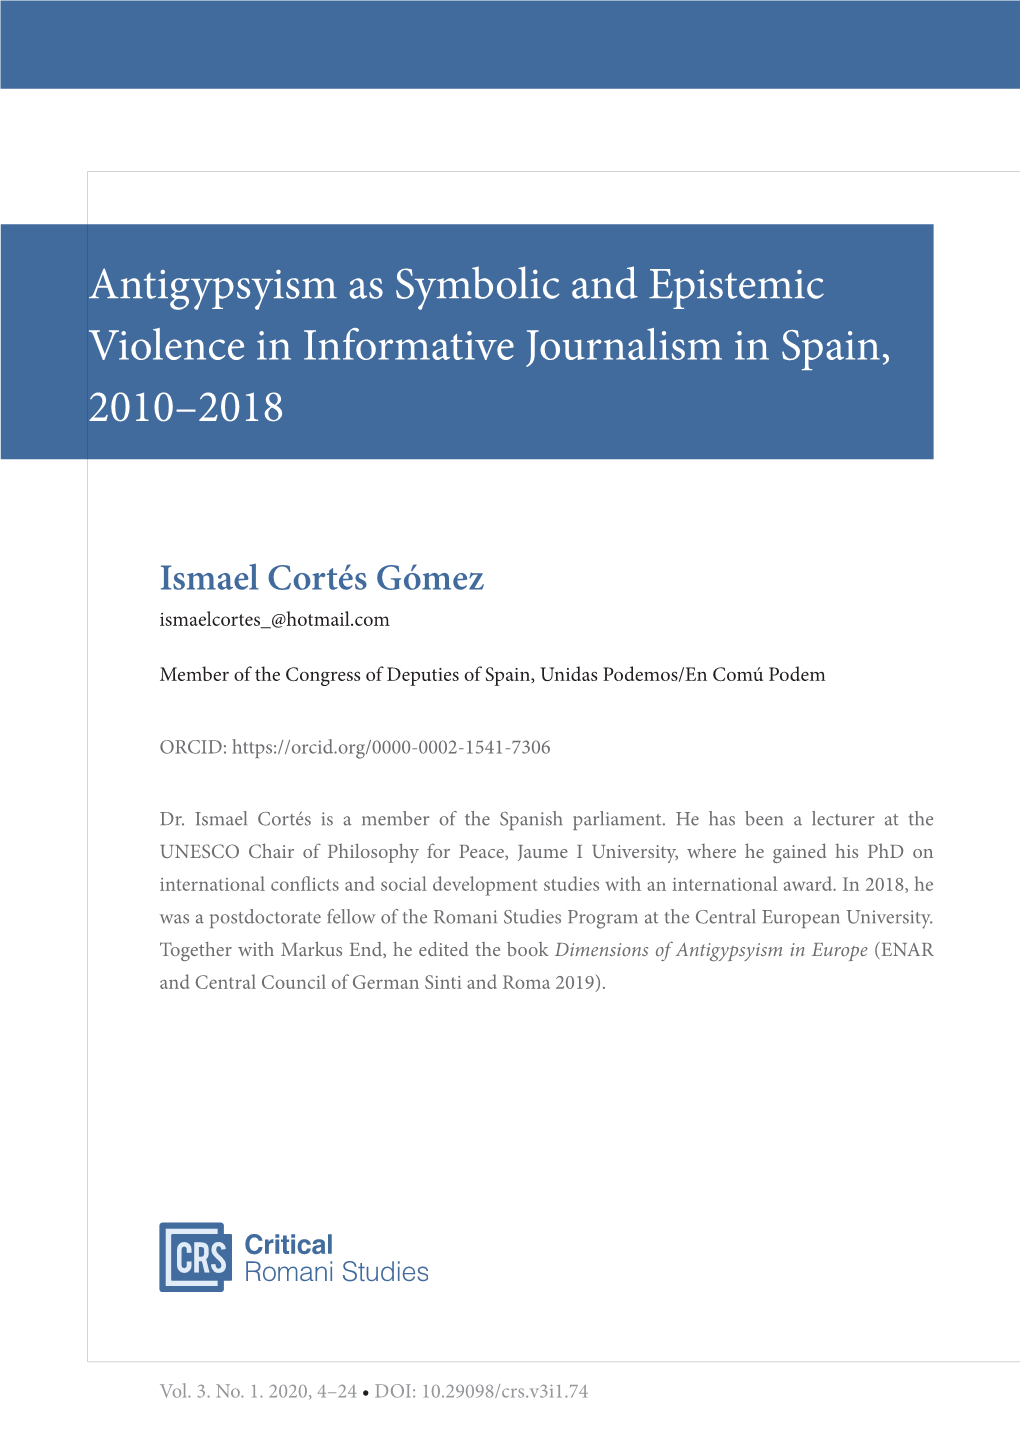 Antigypsyism As Symbolic and Epistemic Violence in Informative Journalism in Spain, 2010–2018